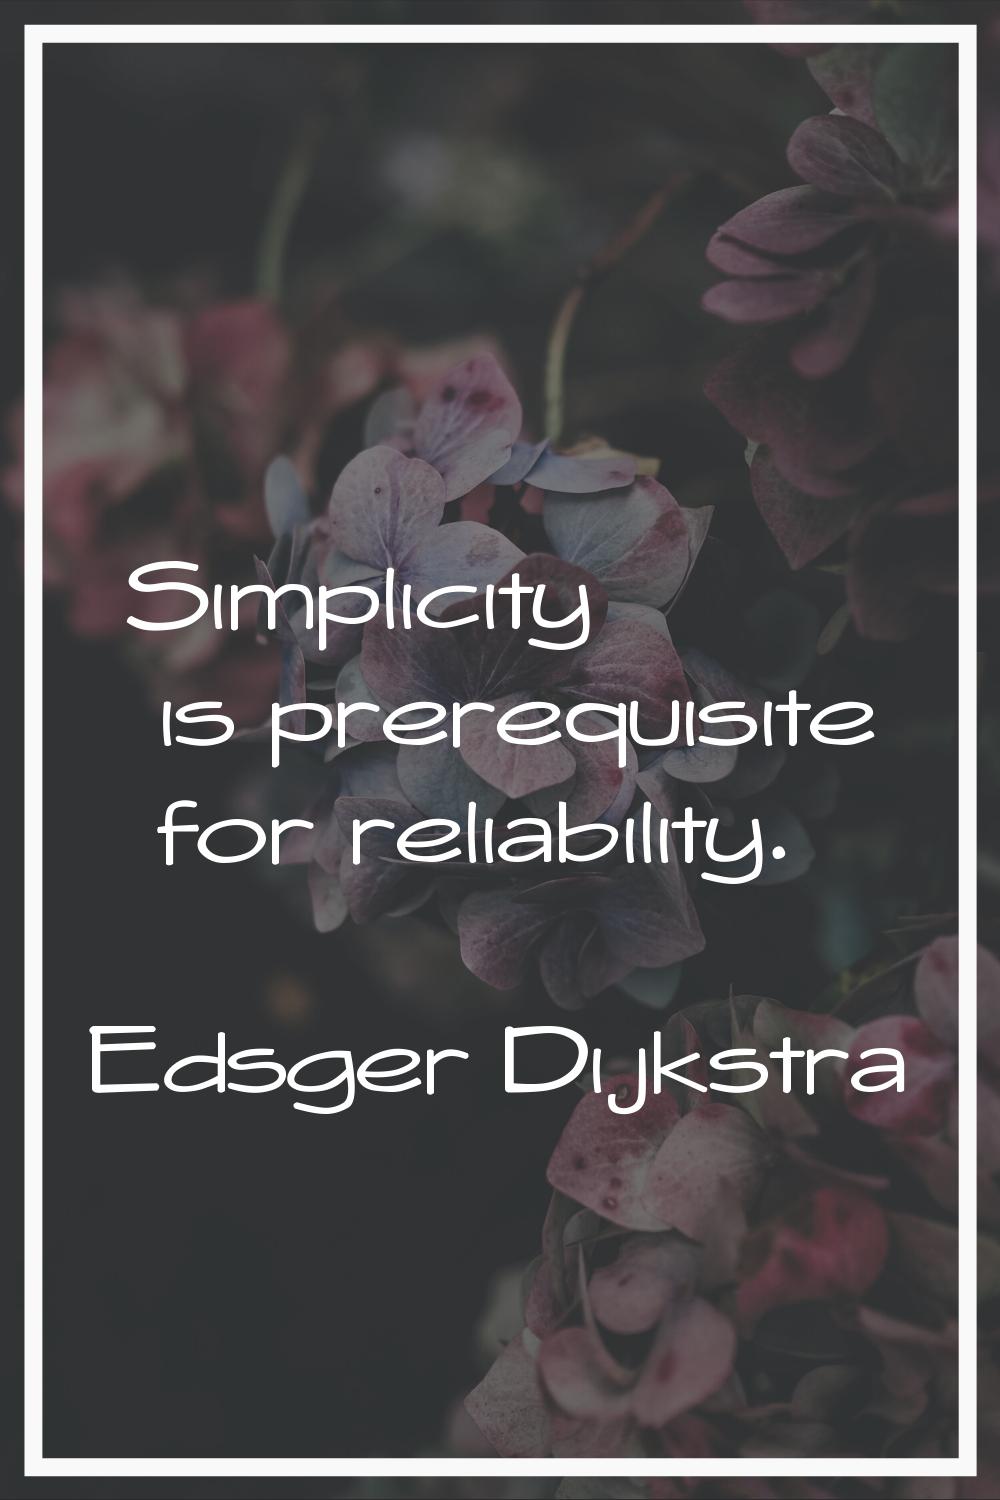 Simplicity is prerequisite for reliability.